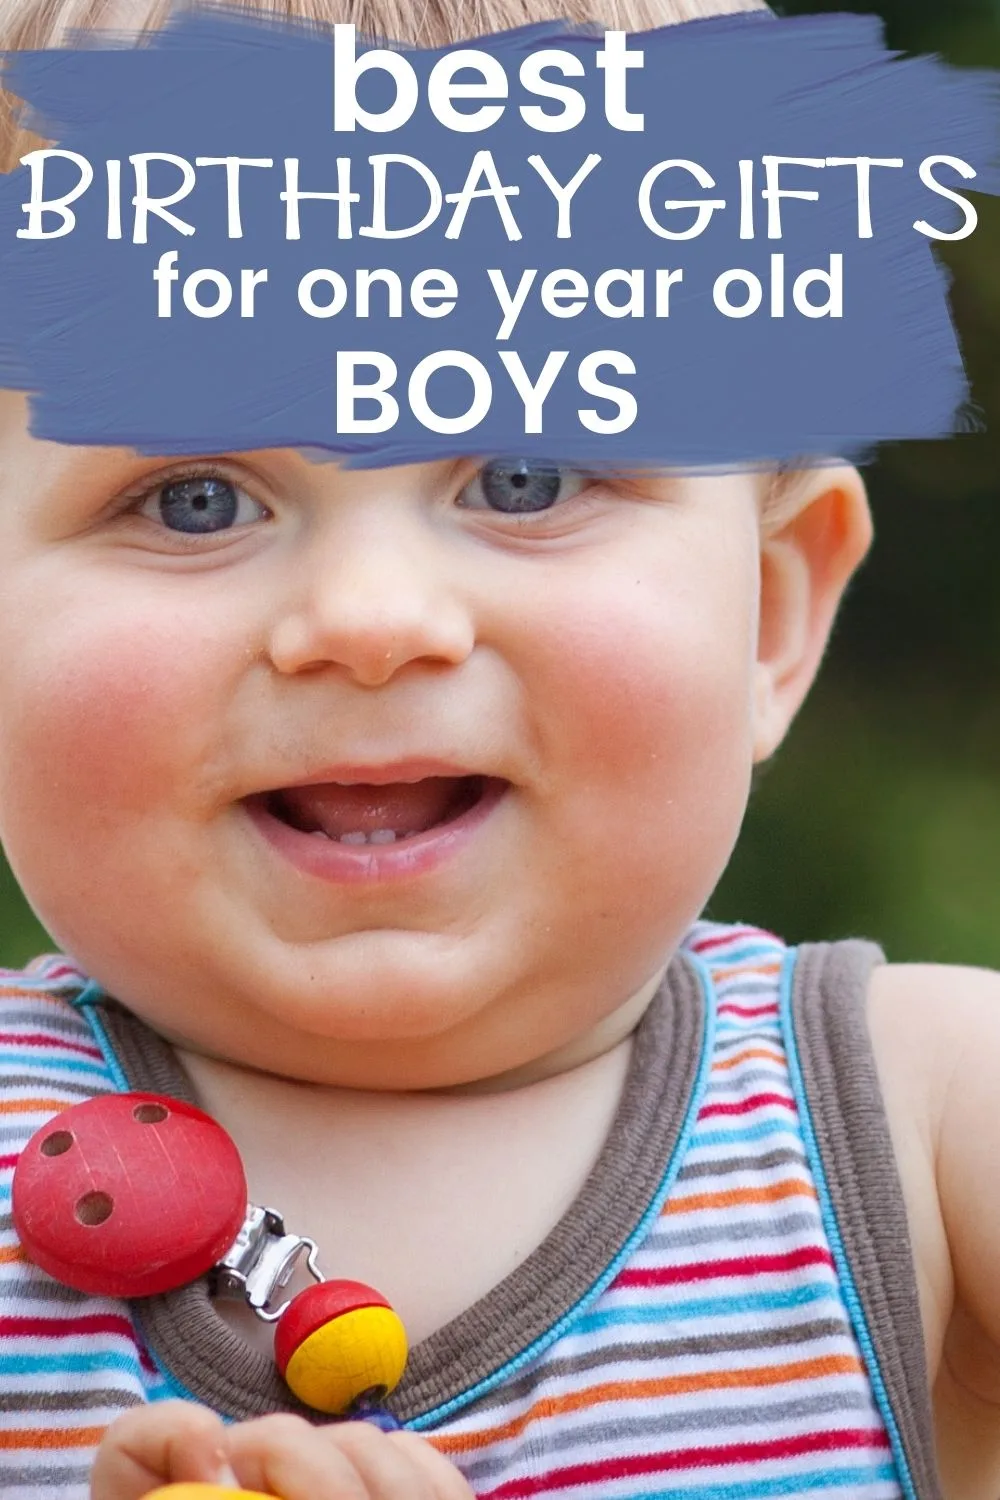 Best birthday gifts for 1 year old boys